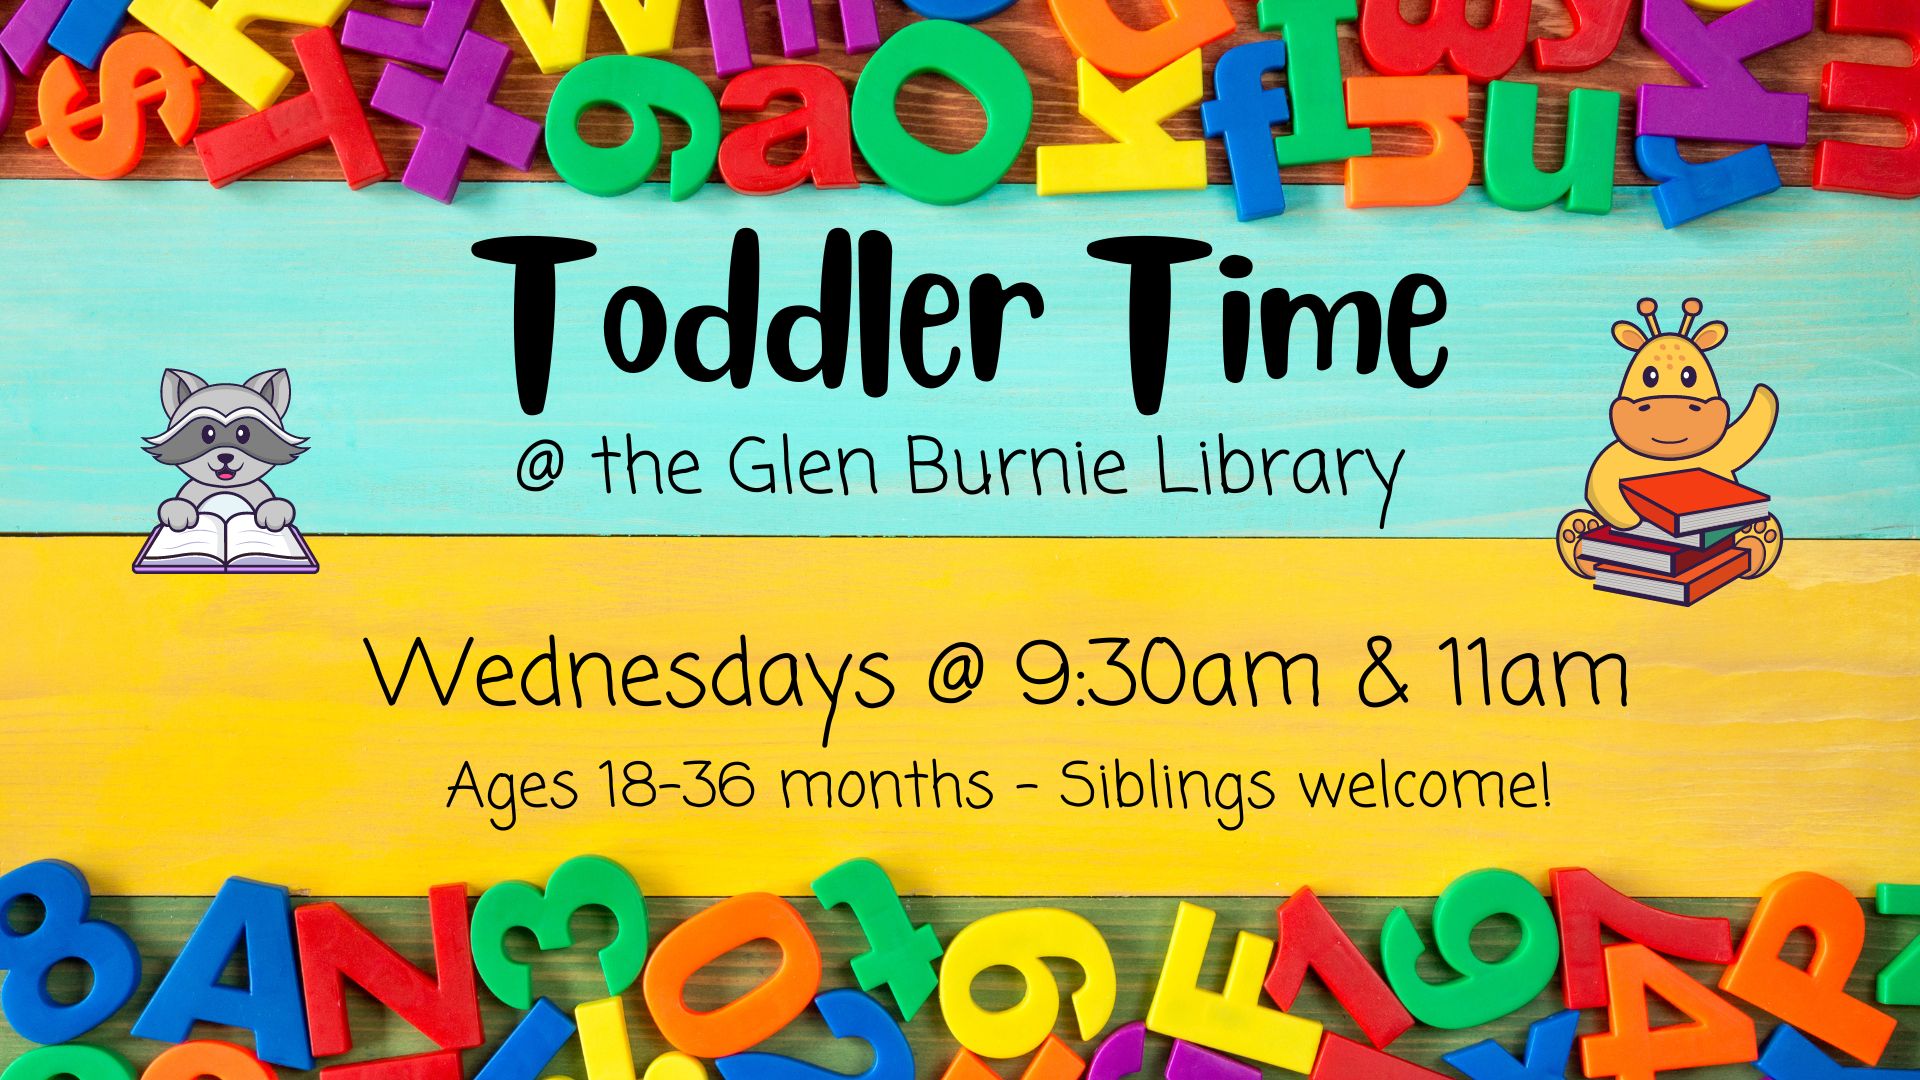 Toddler Time @ the Glen Burnie Library